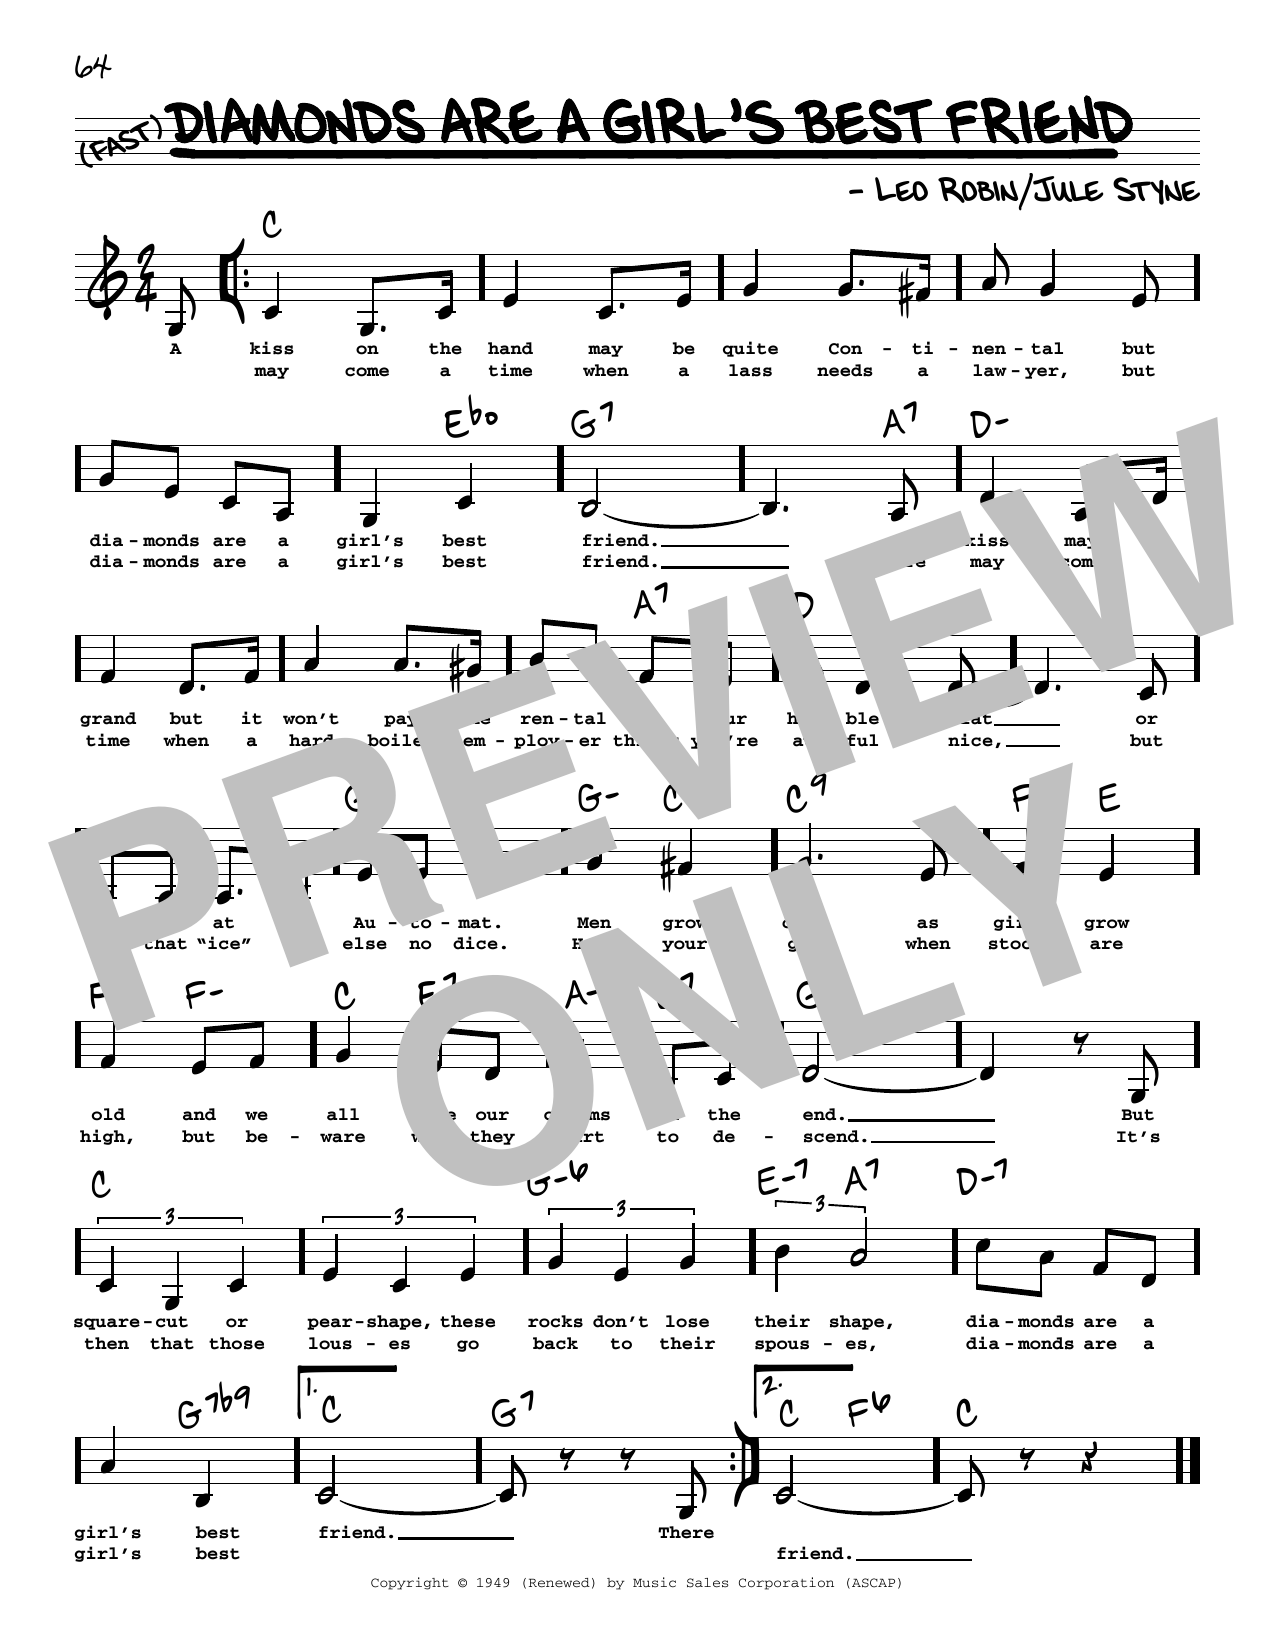 Leo Robin Diamonds Are A Girl's Best Friend (Low Voice) sheet music notes printable PDF score